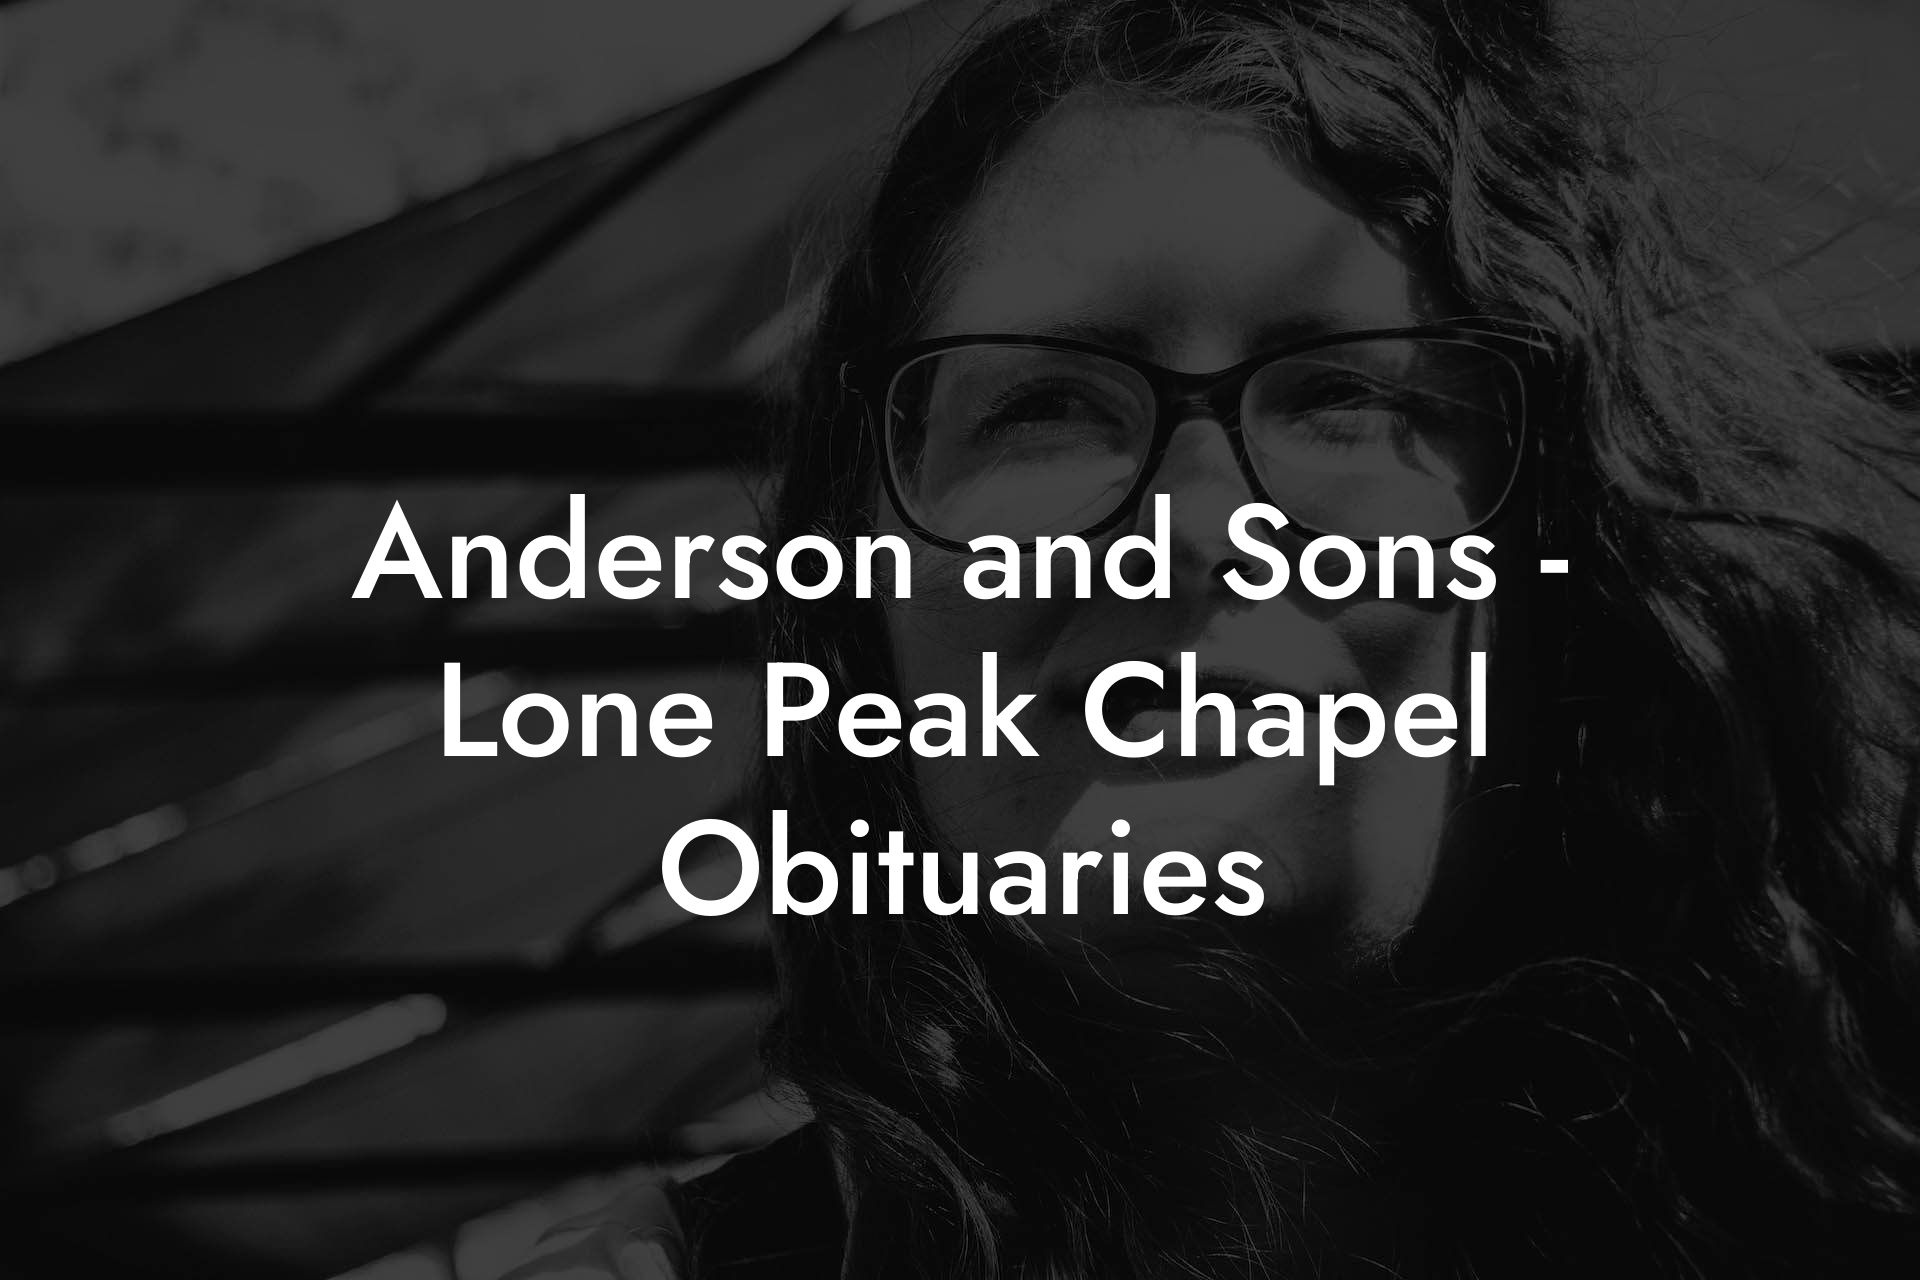 Anderson and Sons - Lone Peak Chapel Obituaries